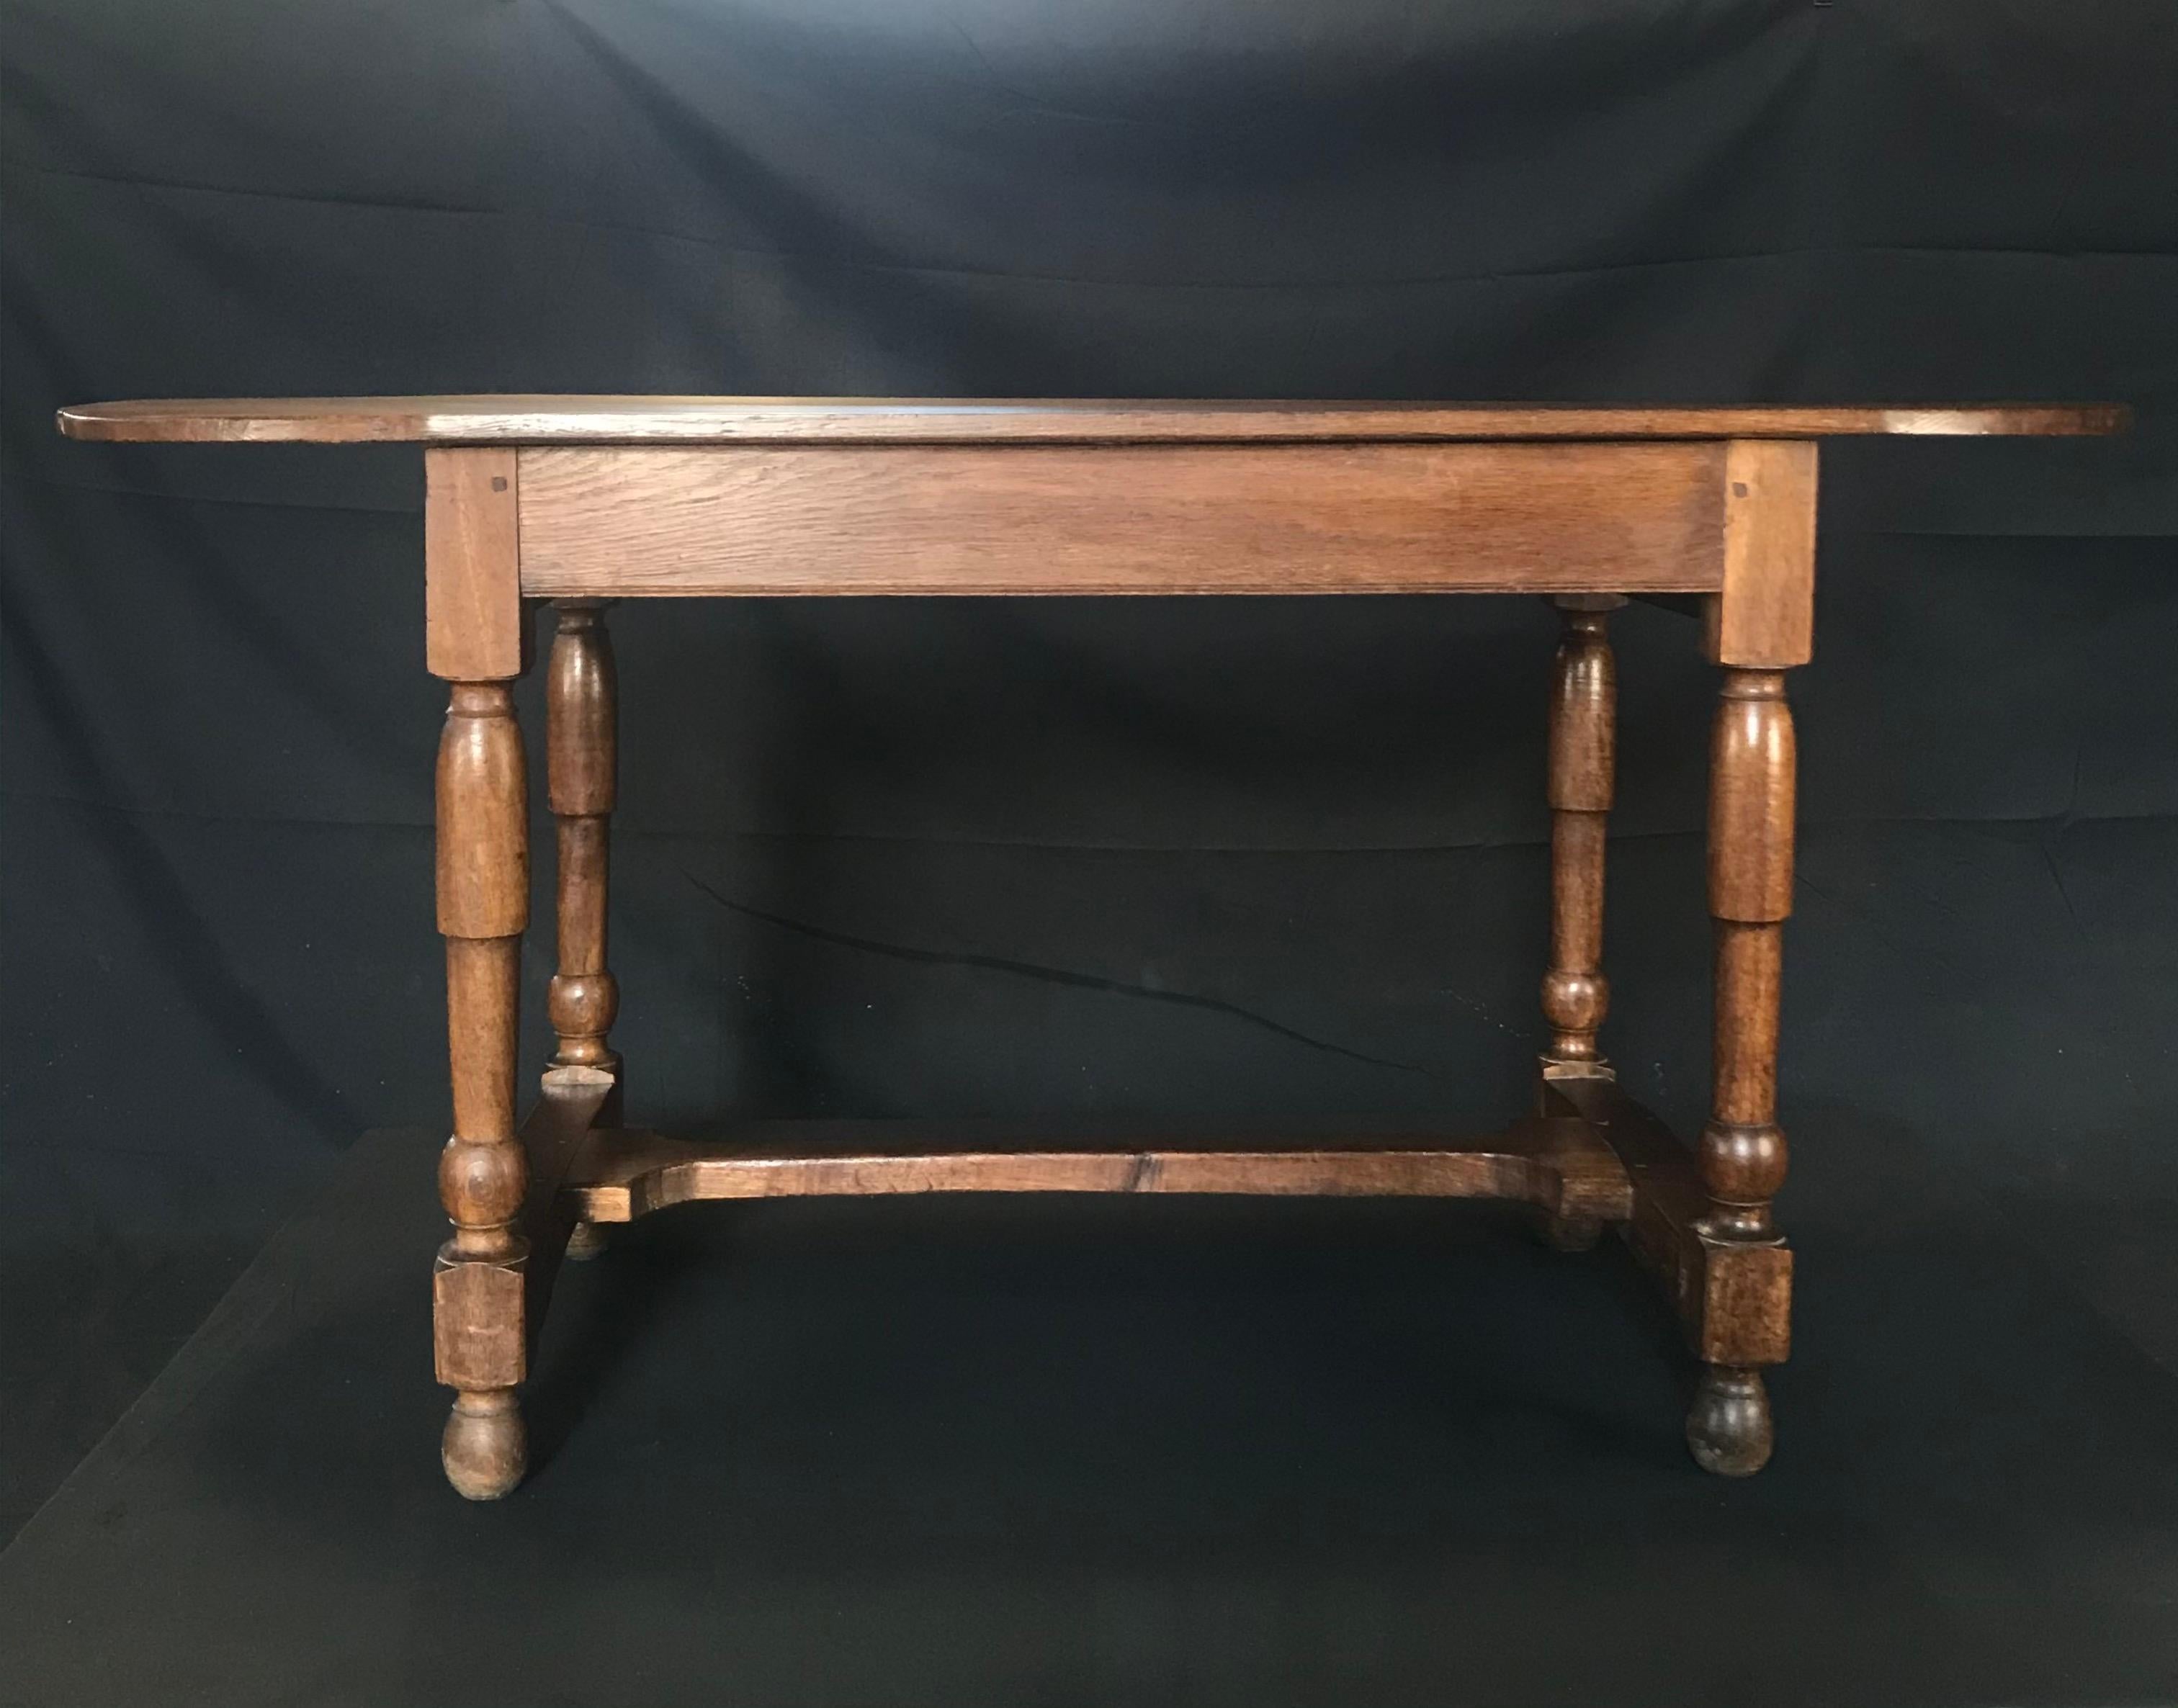 Wonderful size in this French early 19th century provincial farmhouse style walnut oval table that could serve many uses: intimate dining table, desk, or floating side table or center console table. Legs are beautifully turned, with lovely dovetail